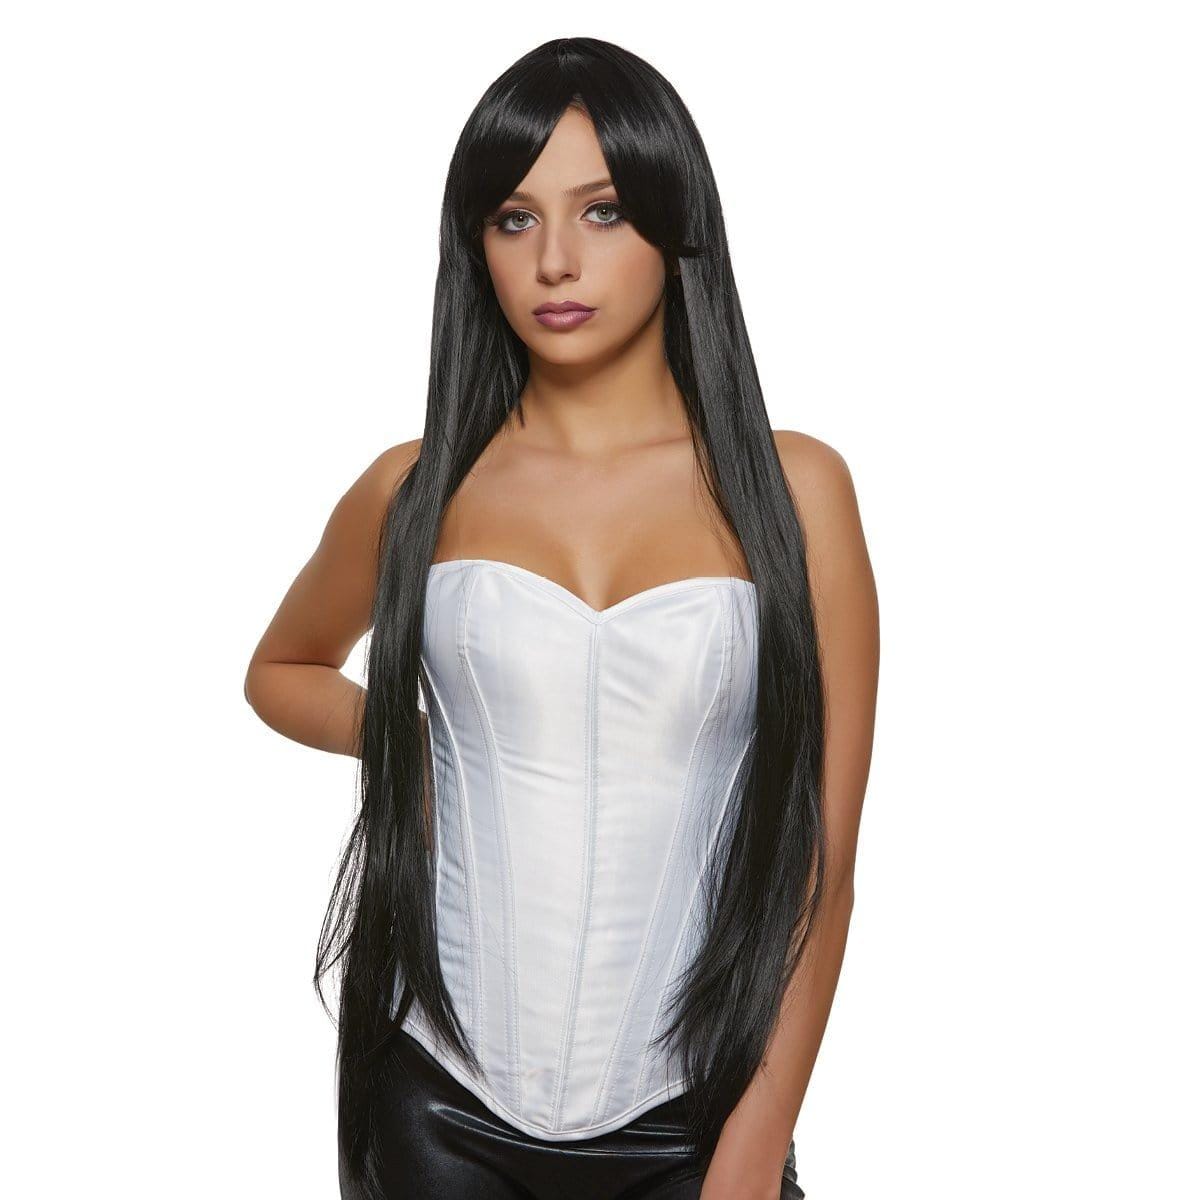 Buy Costume Accessories Fearless black Chérie wig for women sold at Party Expert